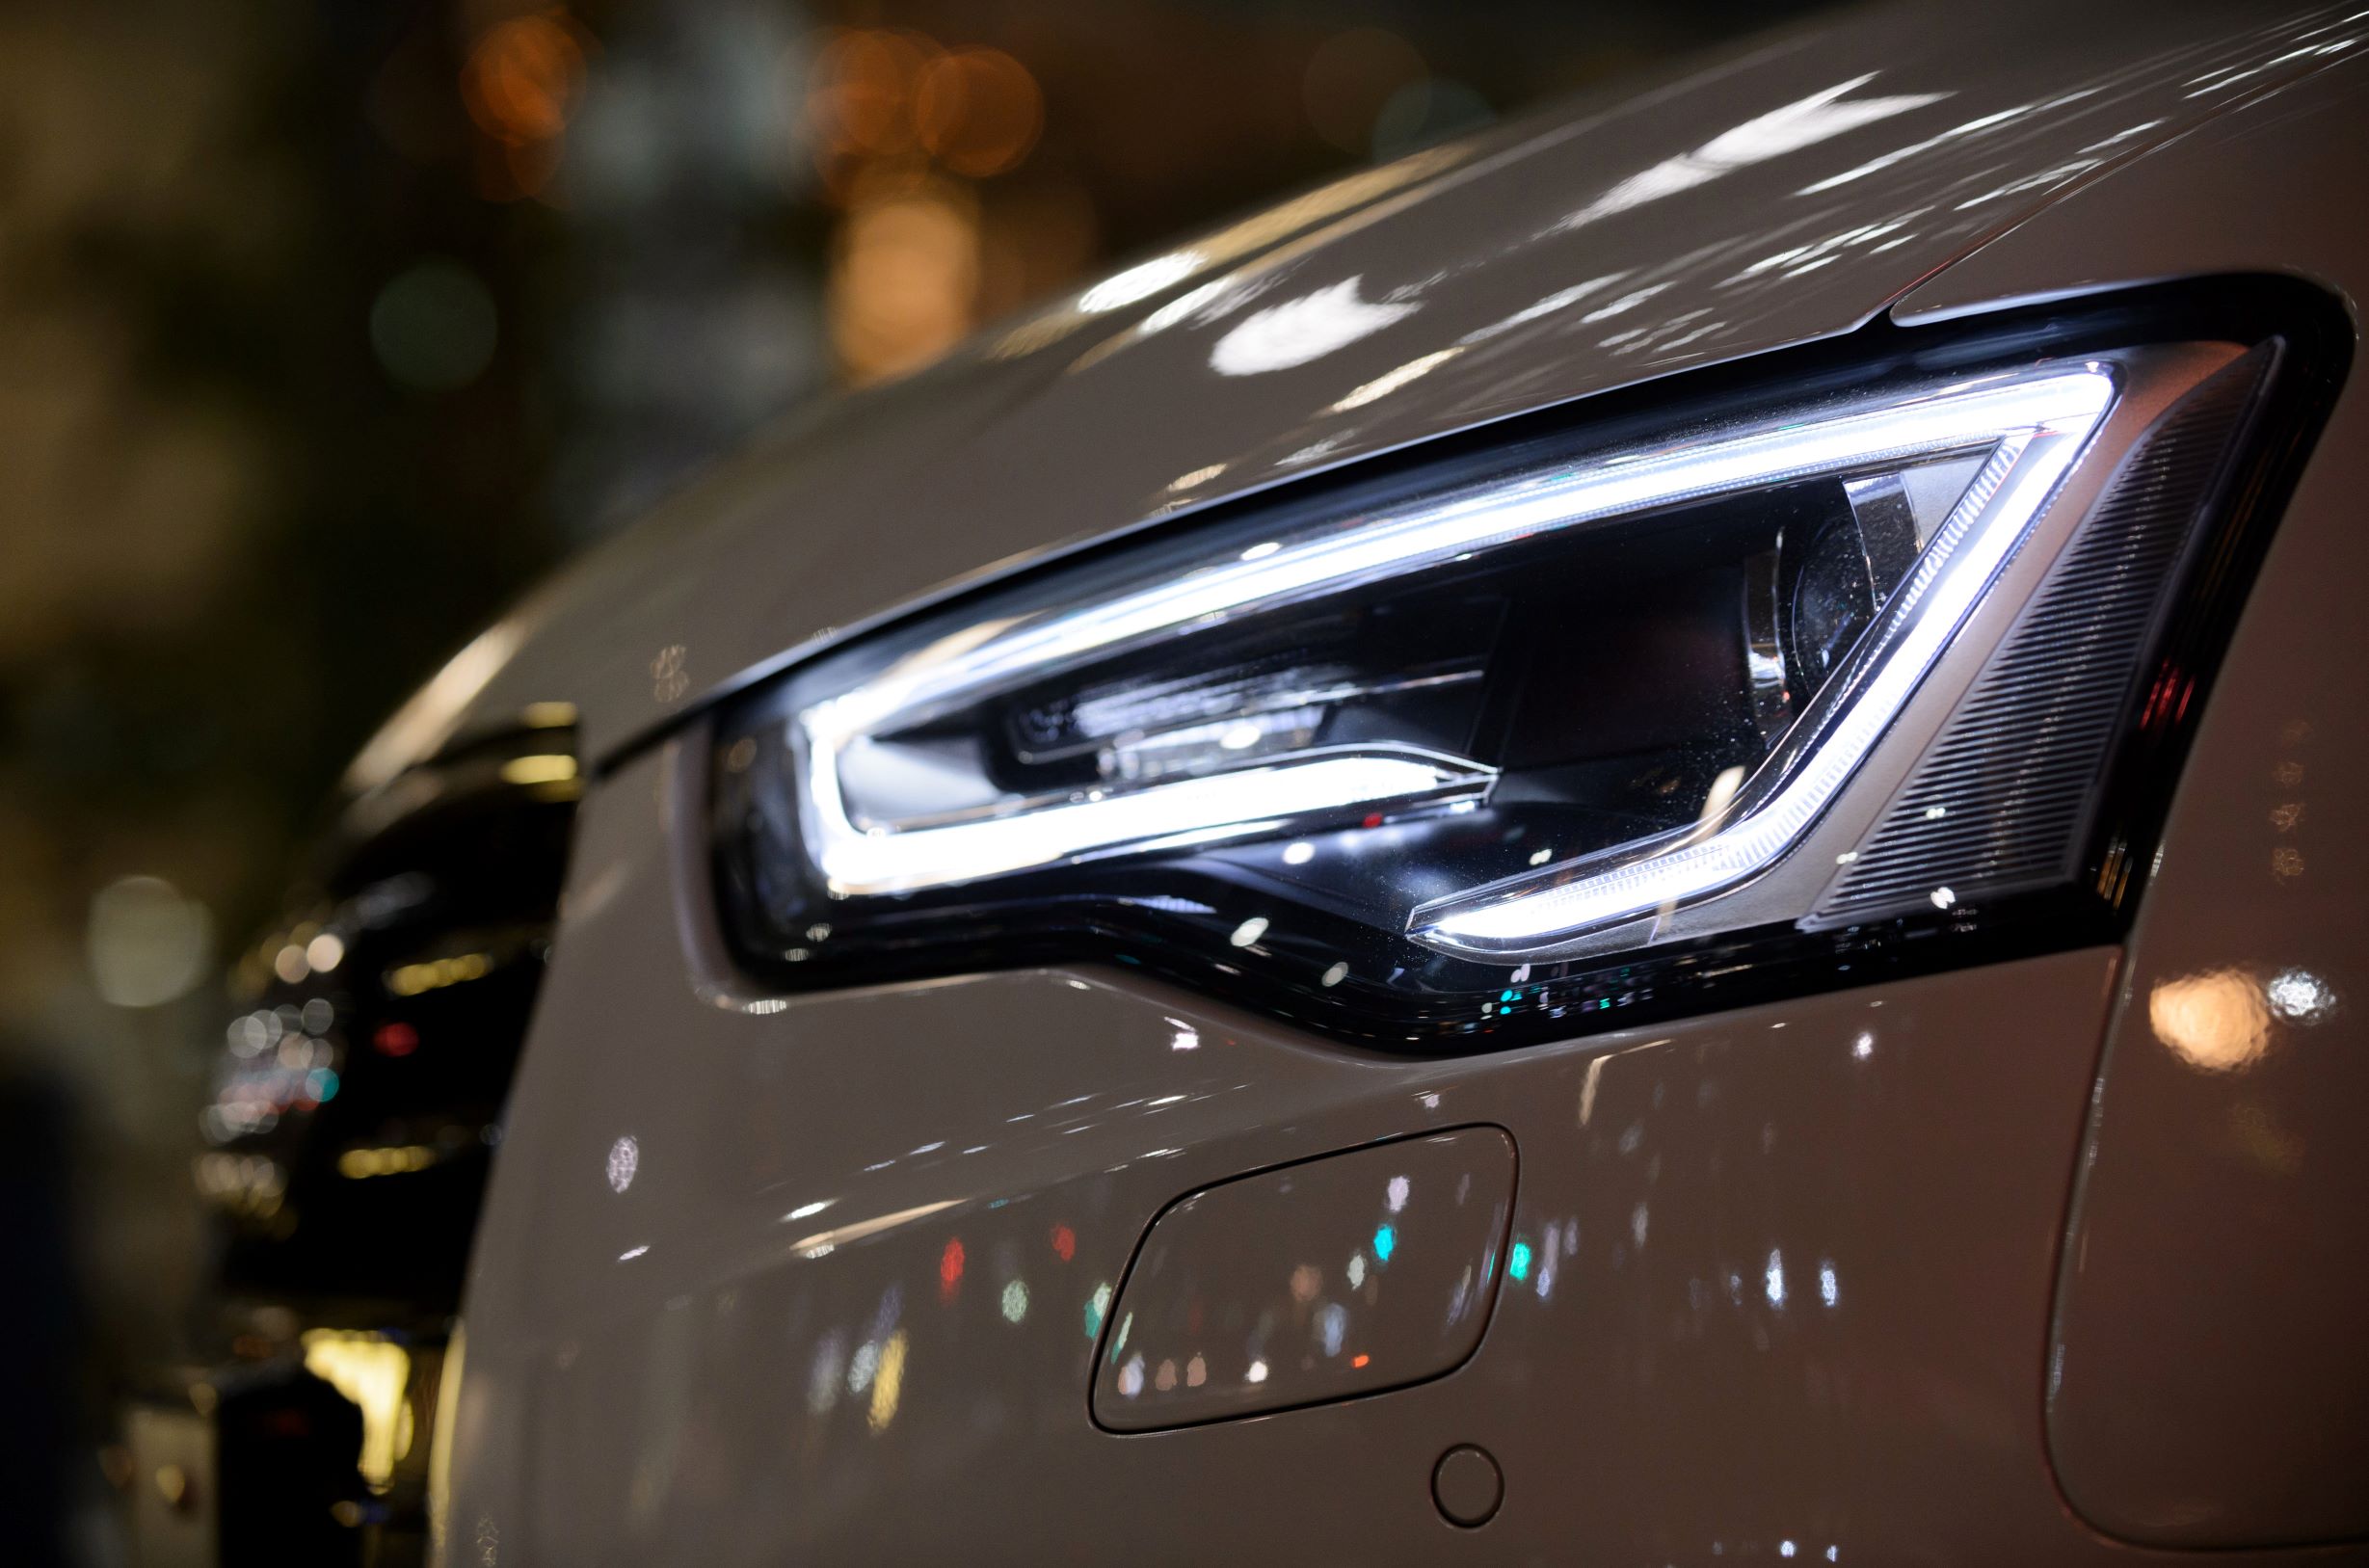 Can HID and LED Headlights Damage Your Eyes?